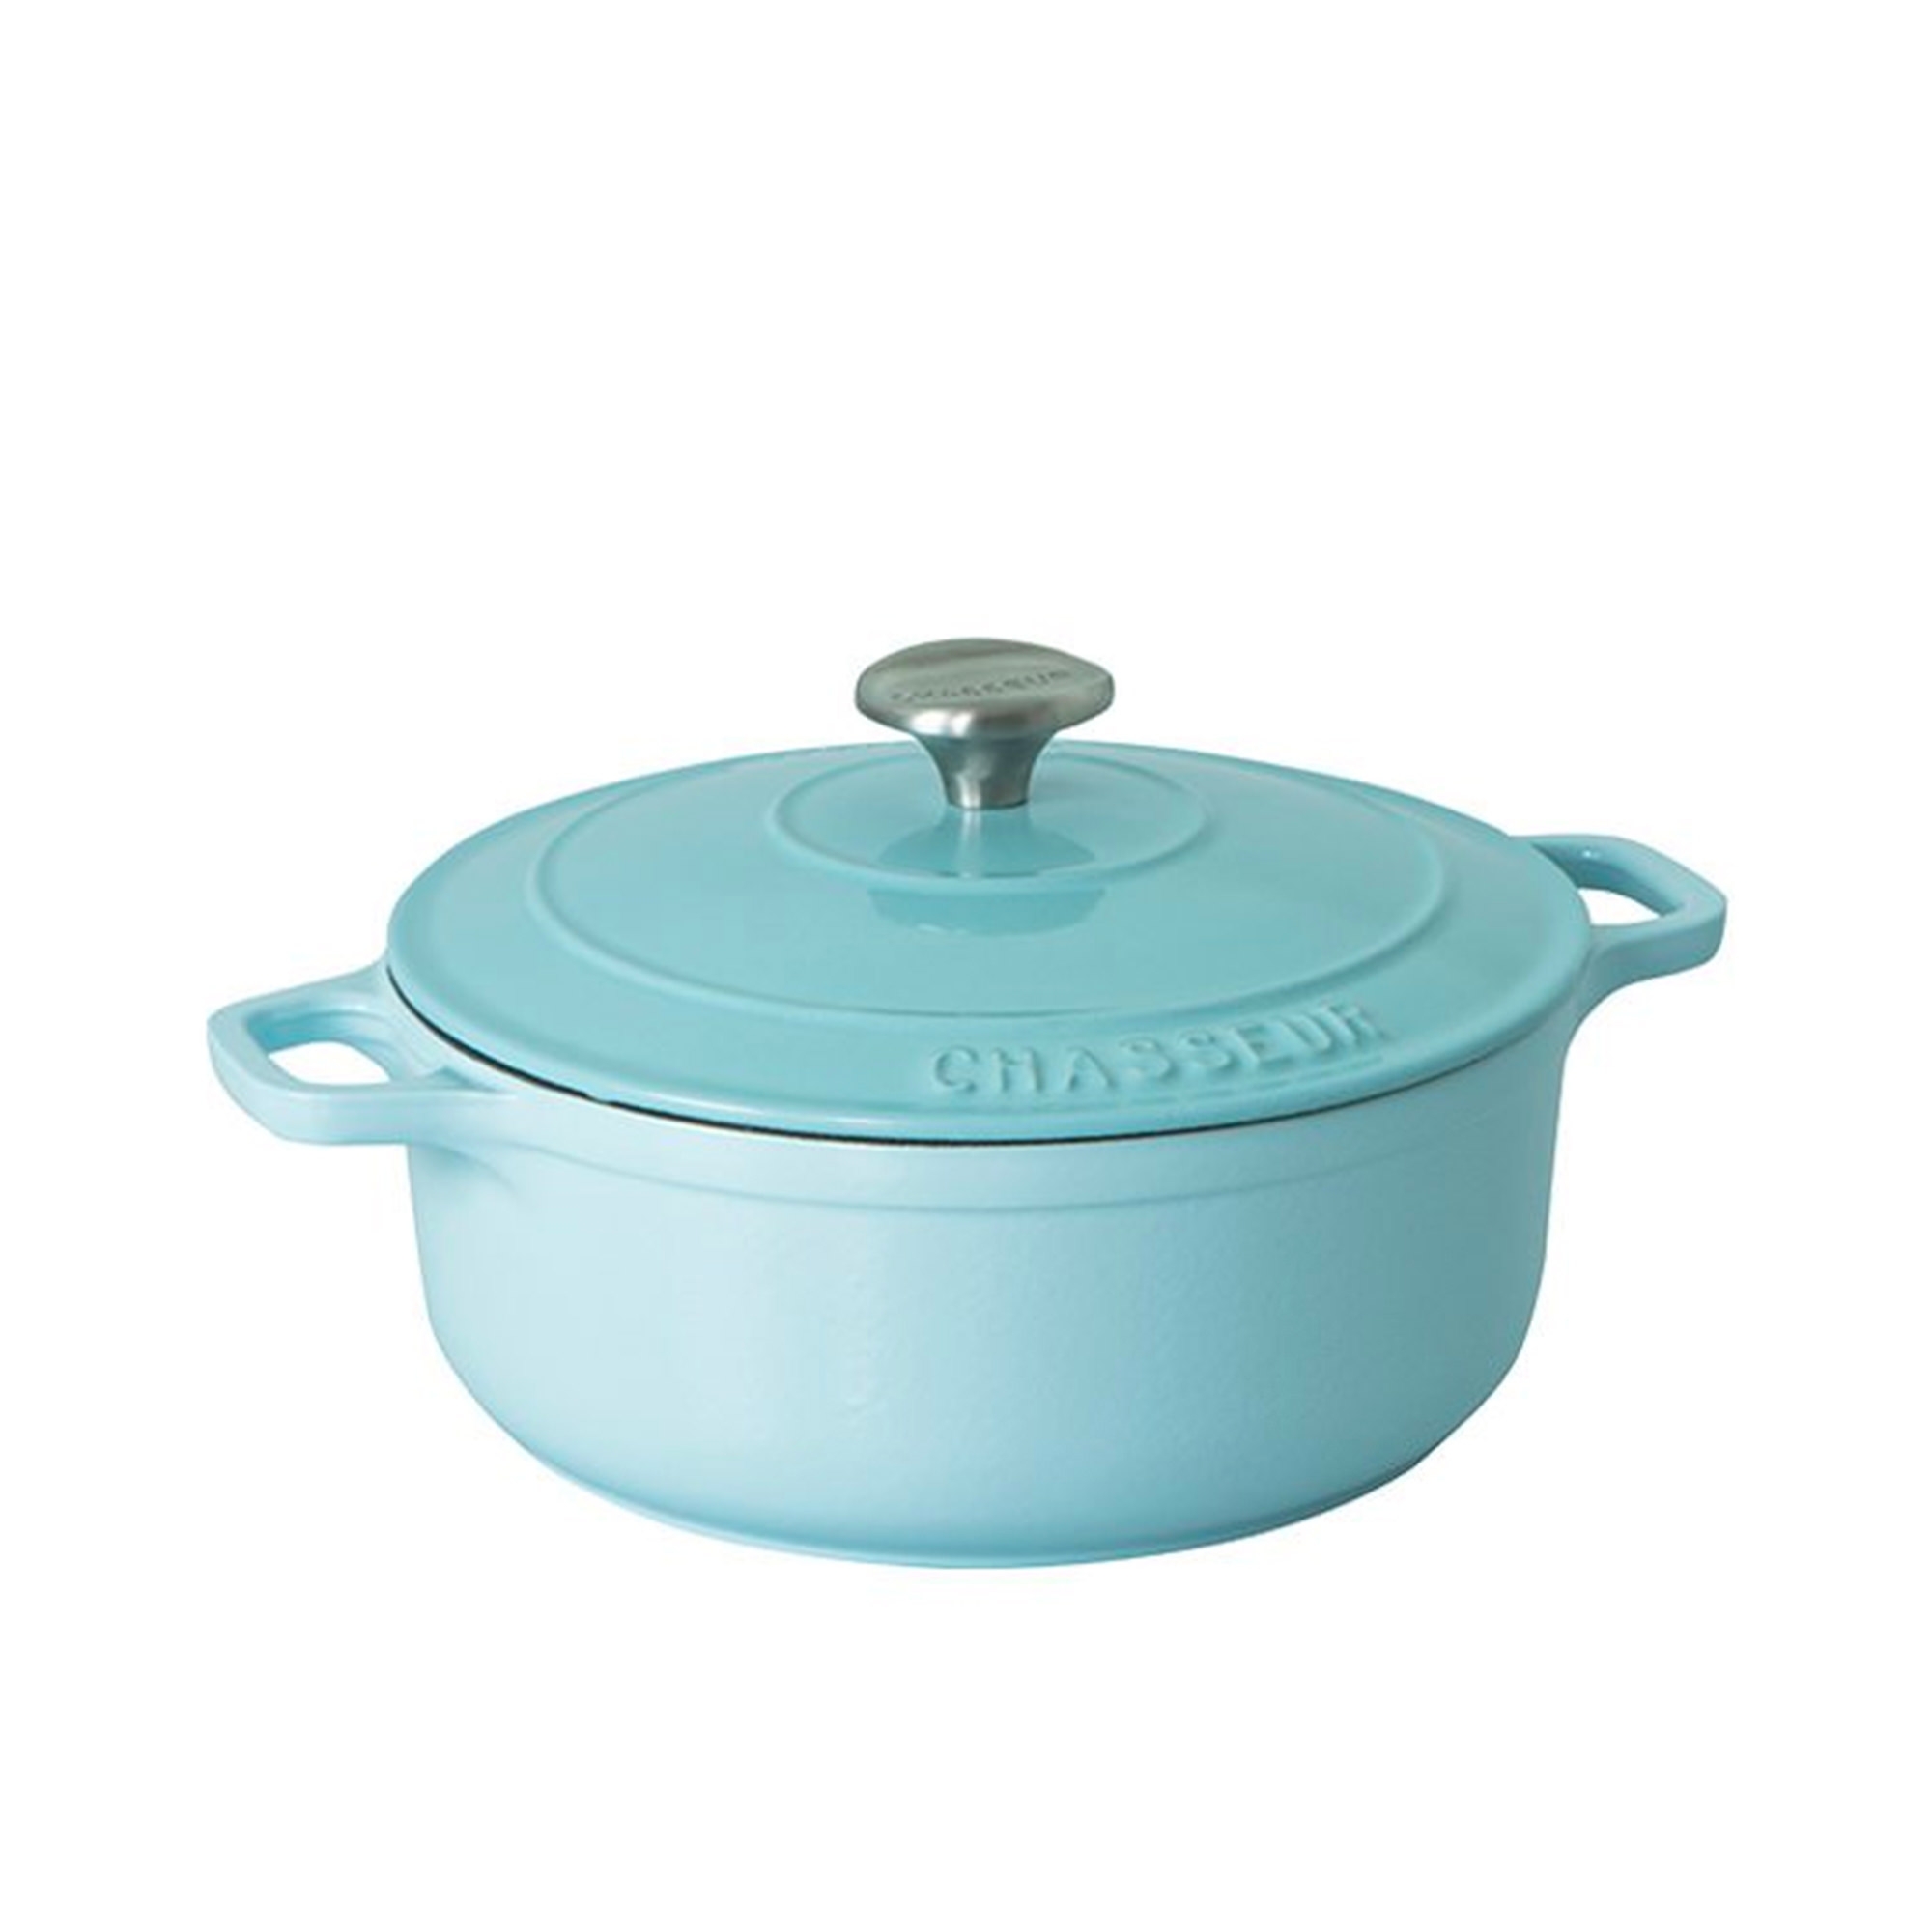 Chasseur Round French Oven 24cm - 4L Duck Egg Blue Image 1